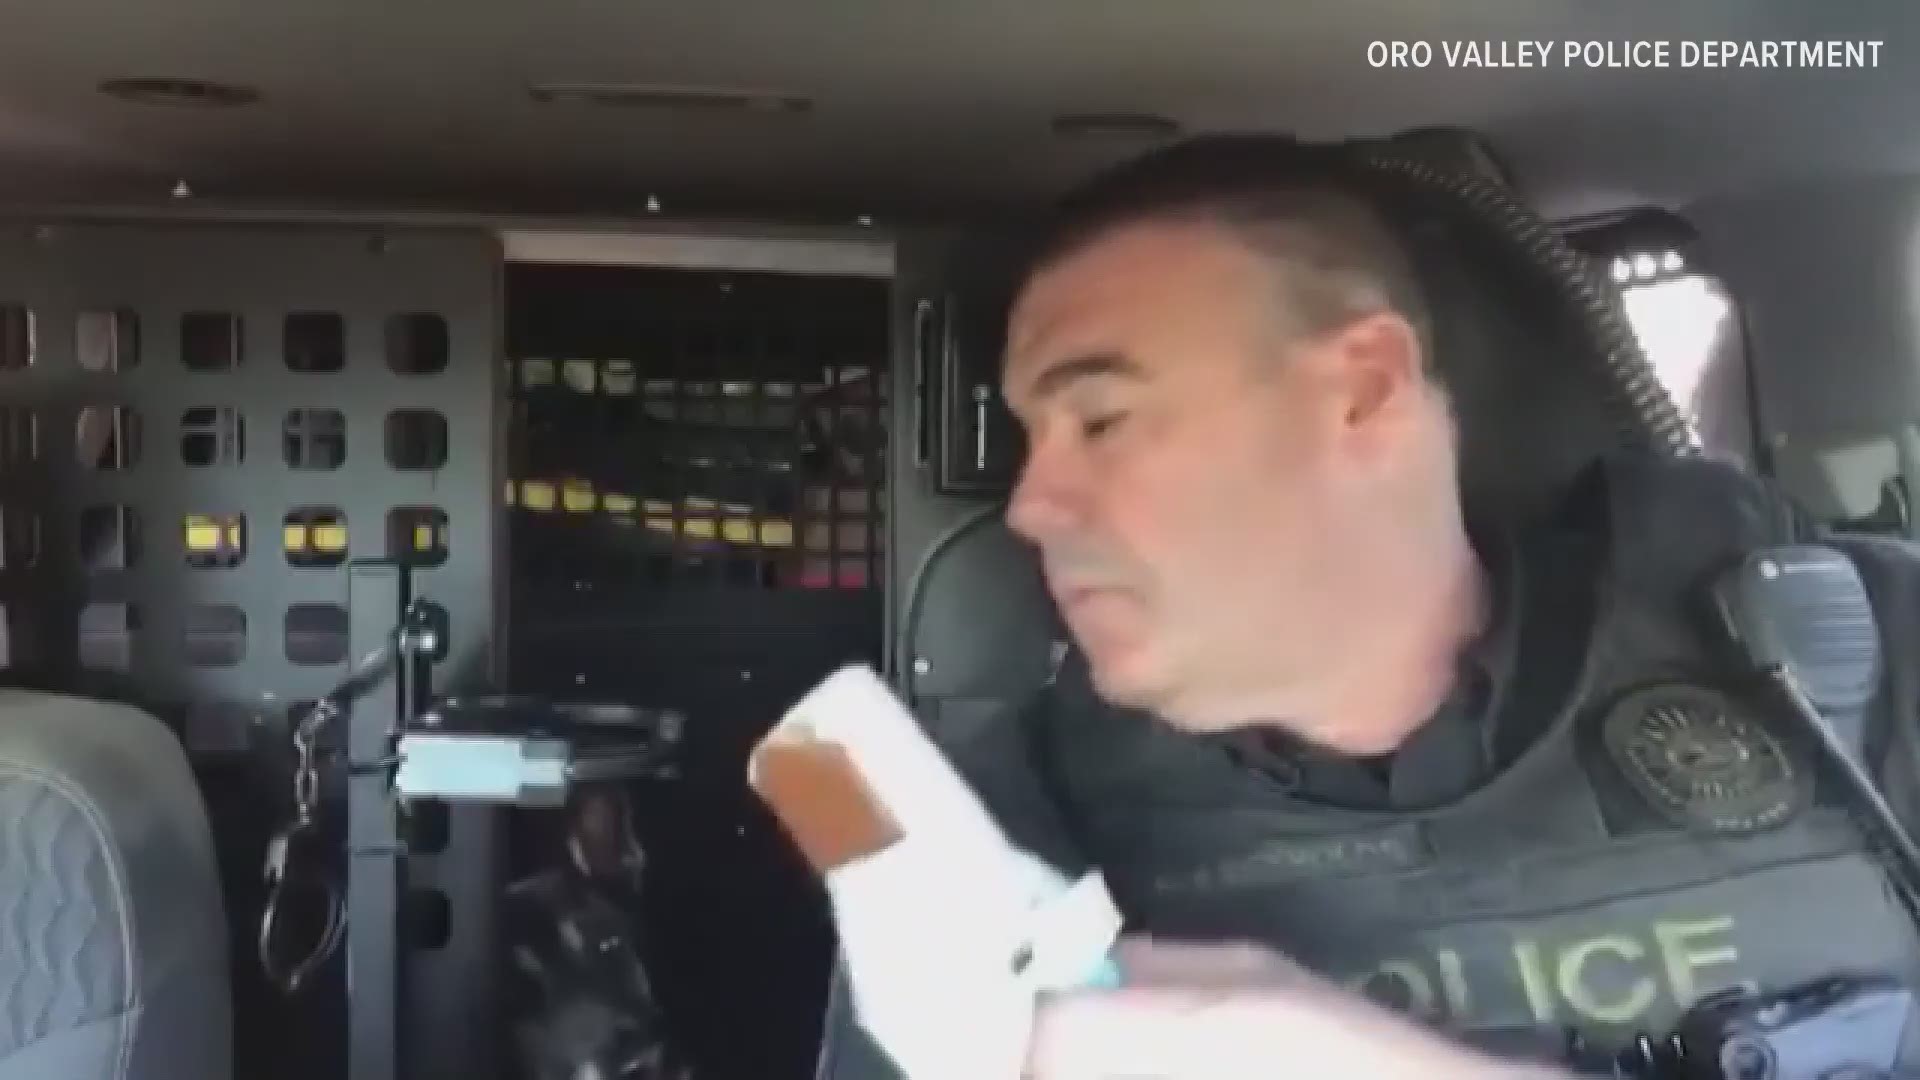 Bruno is a police K-9 for the Oro Valley Police Department in Arizona. His handler gifted him with an ice cream treat during his last call.